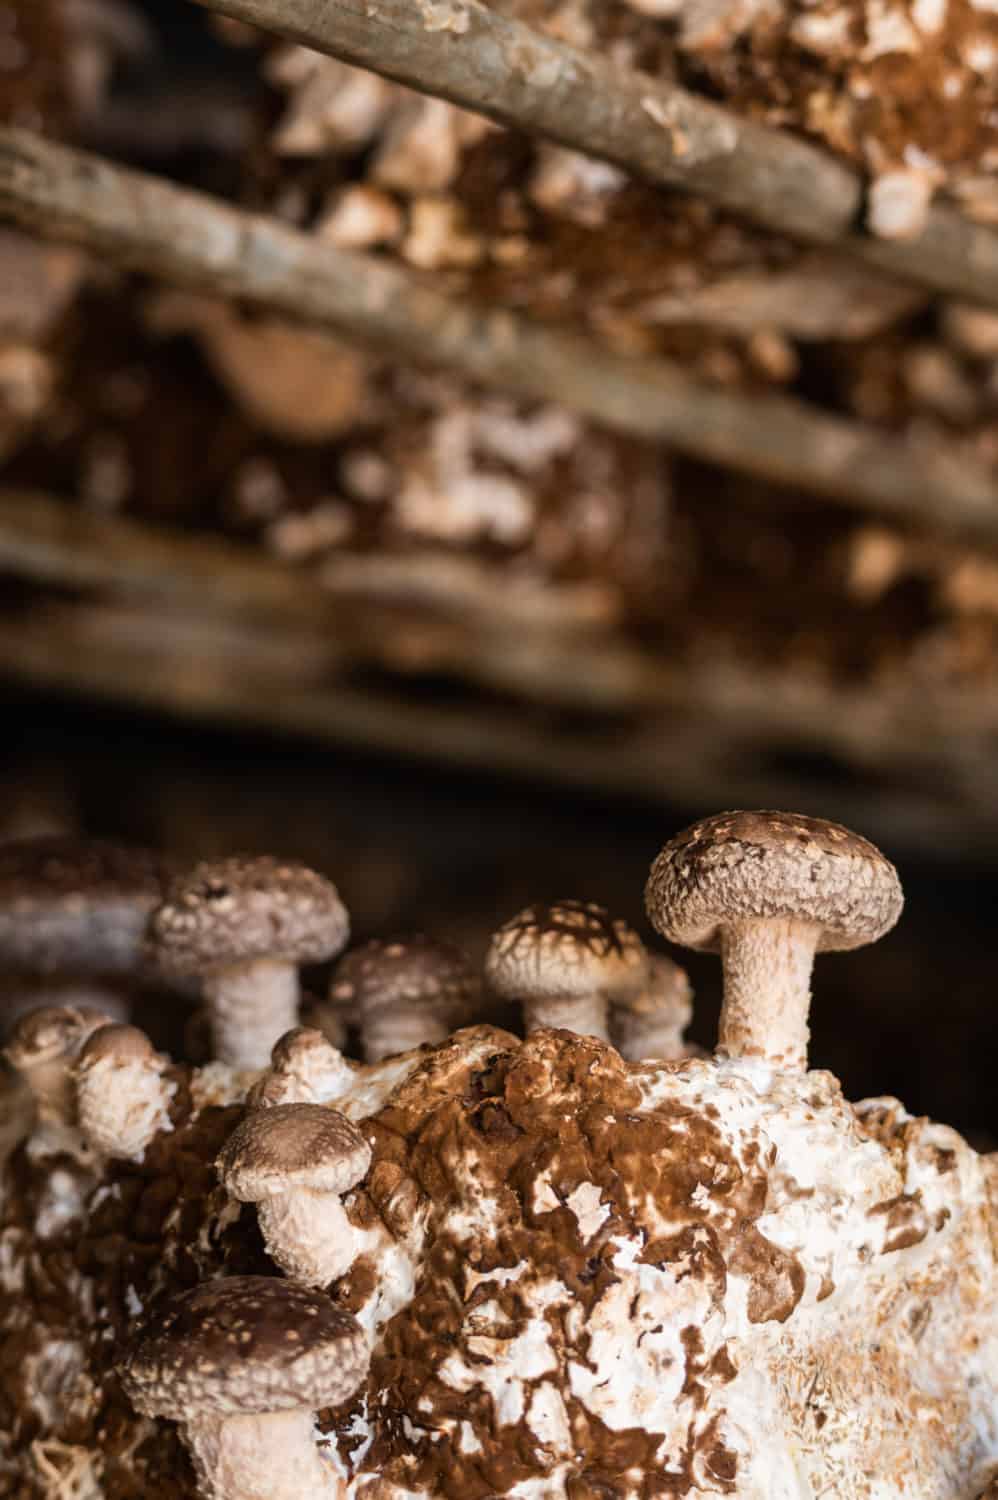 Learn How Mushrooms are Grown at Far West Fungi